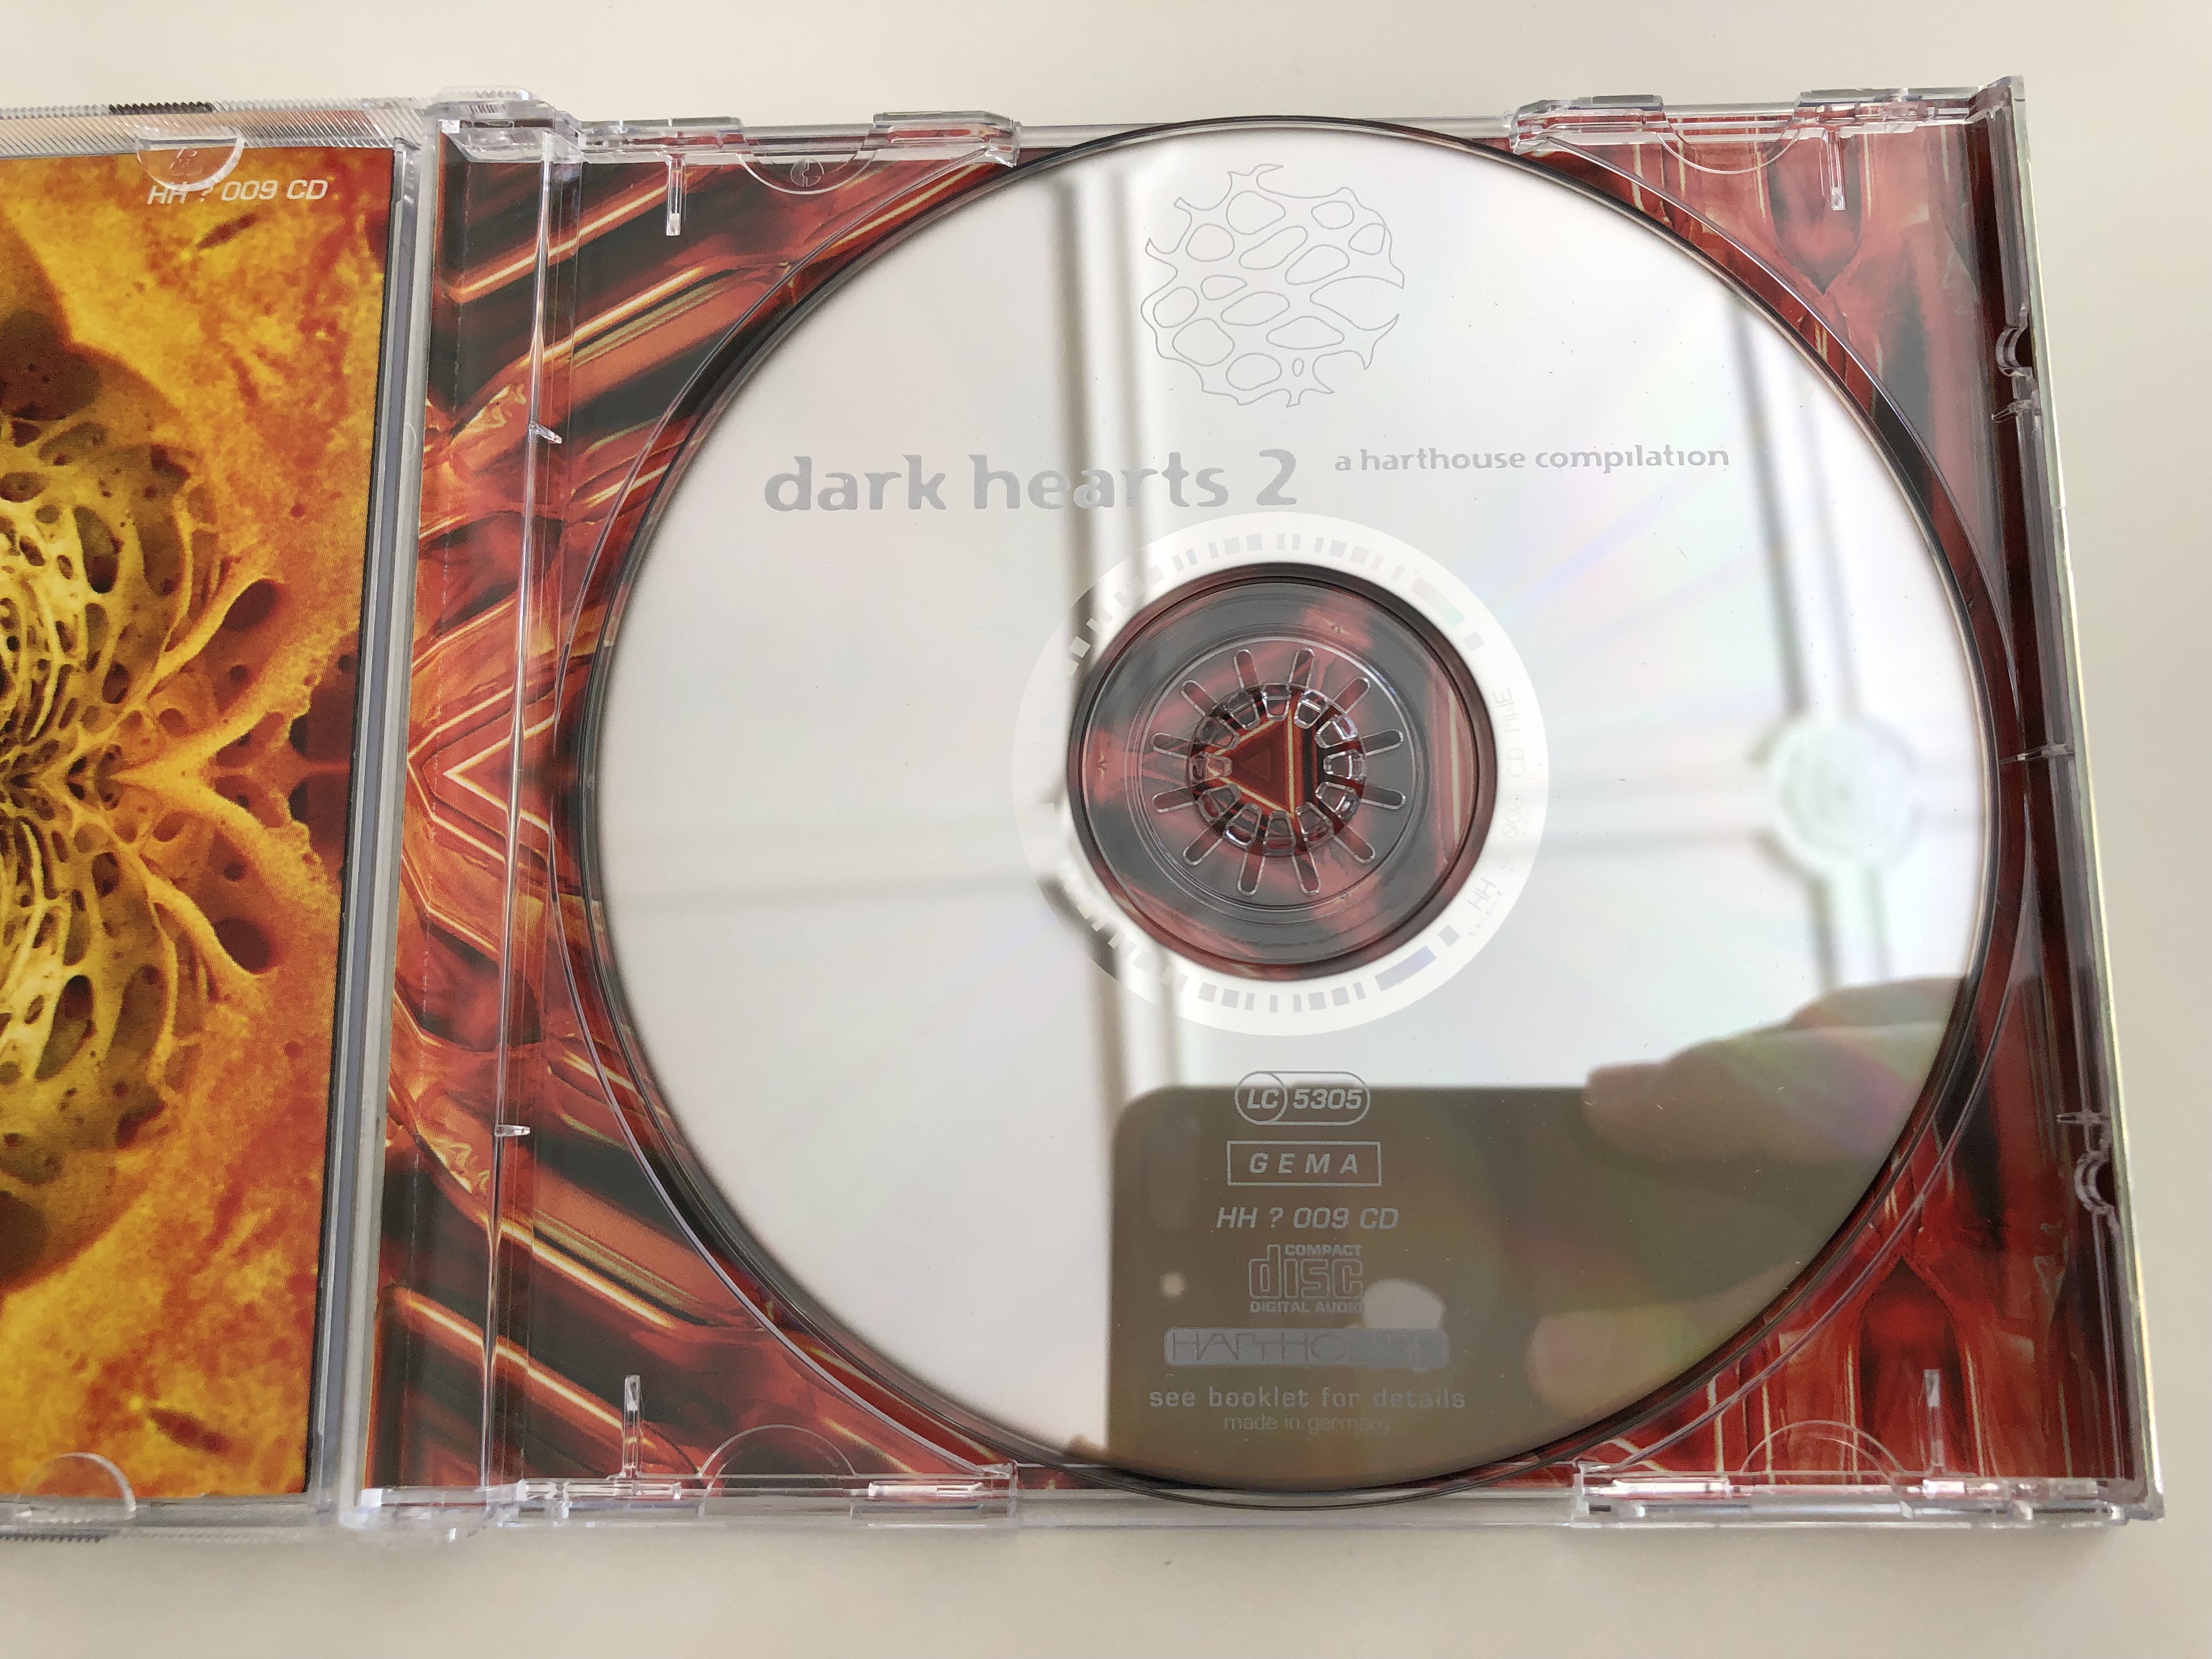 -dark-hearts-vol-2-harthouse-compilation-claude-young-braincell-alter-ego-thor-inc.-hh-009-cd-audio-cd-1995-eye-music-4-.jpg